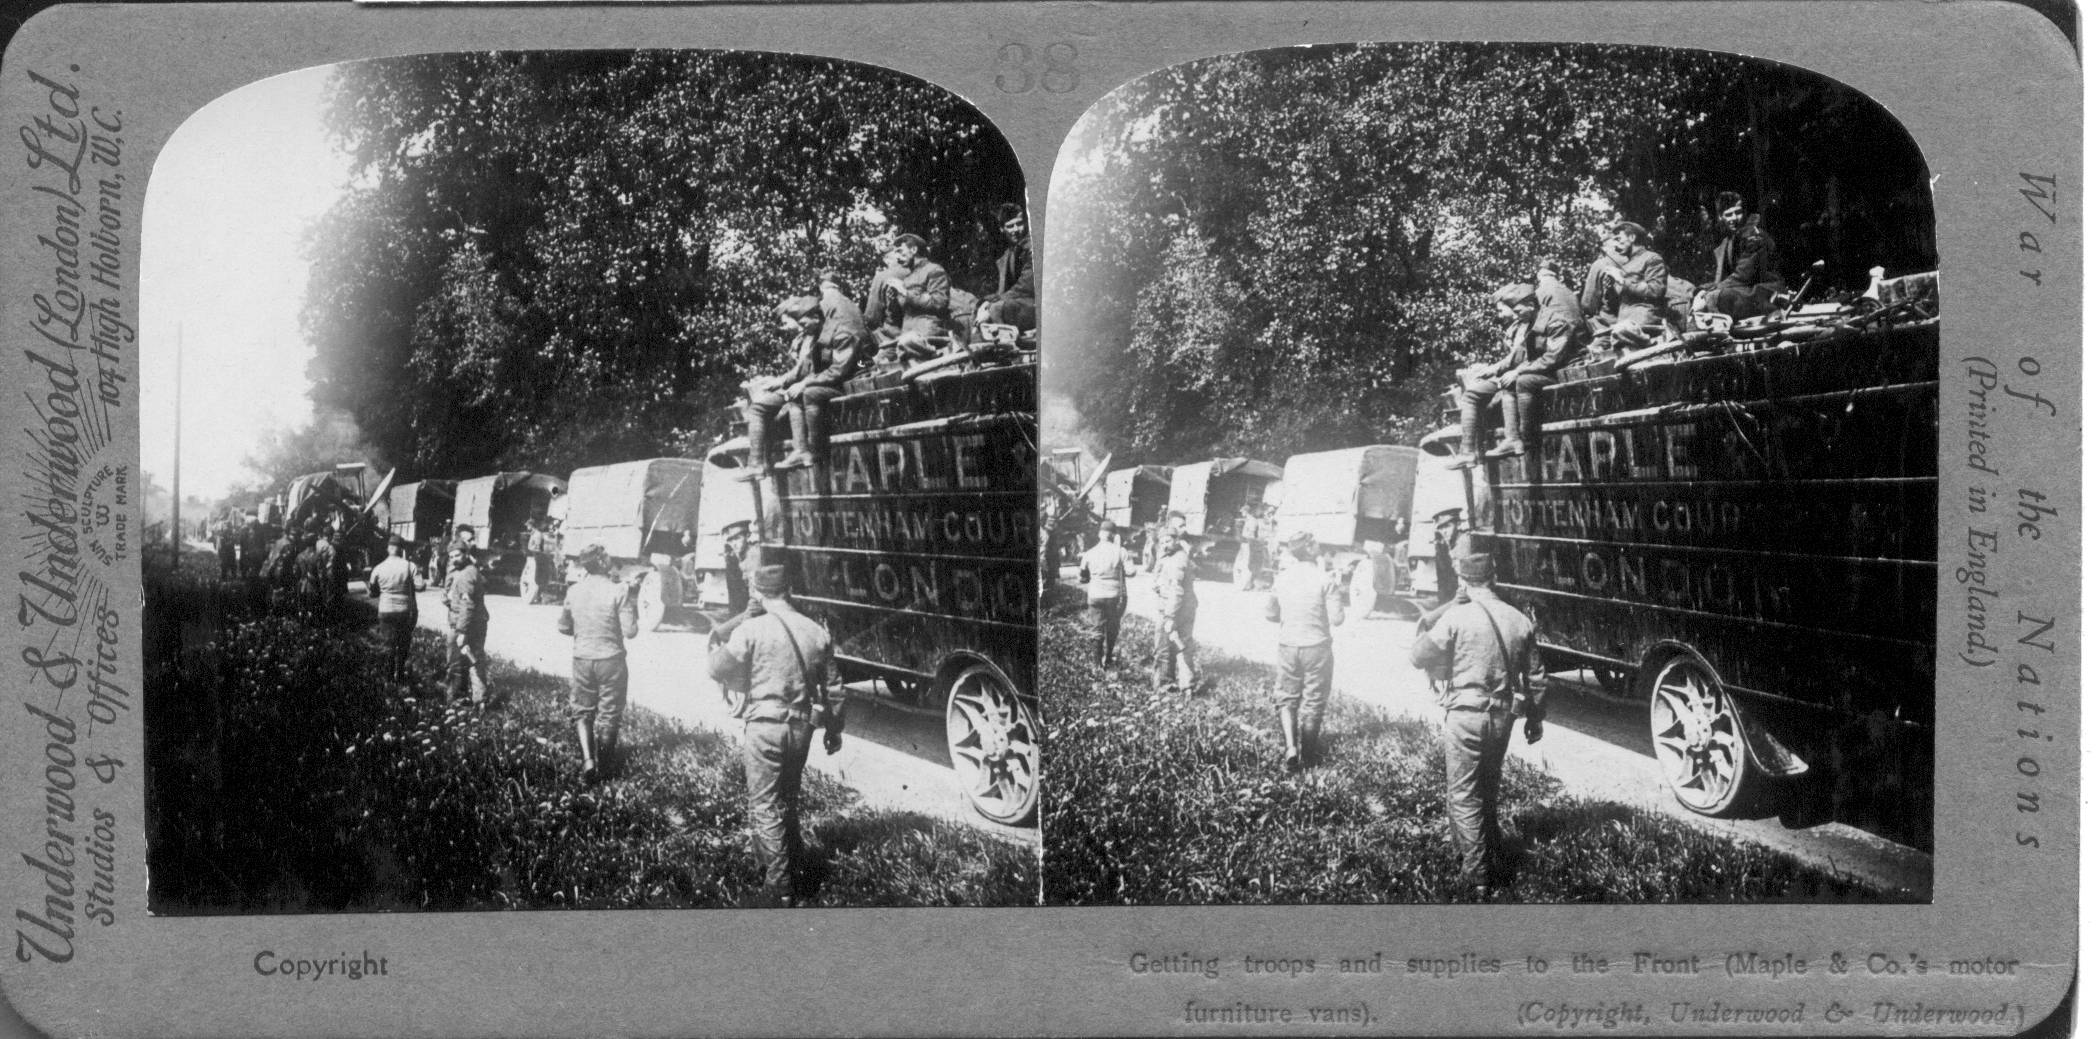 Getting troops and supplies to the Front (Maple & Co.'s motor furniture vans)